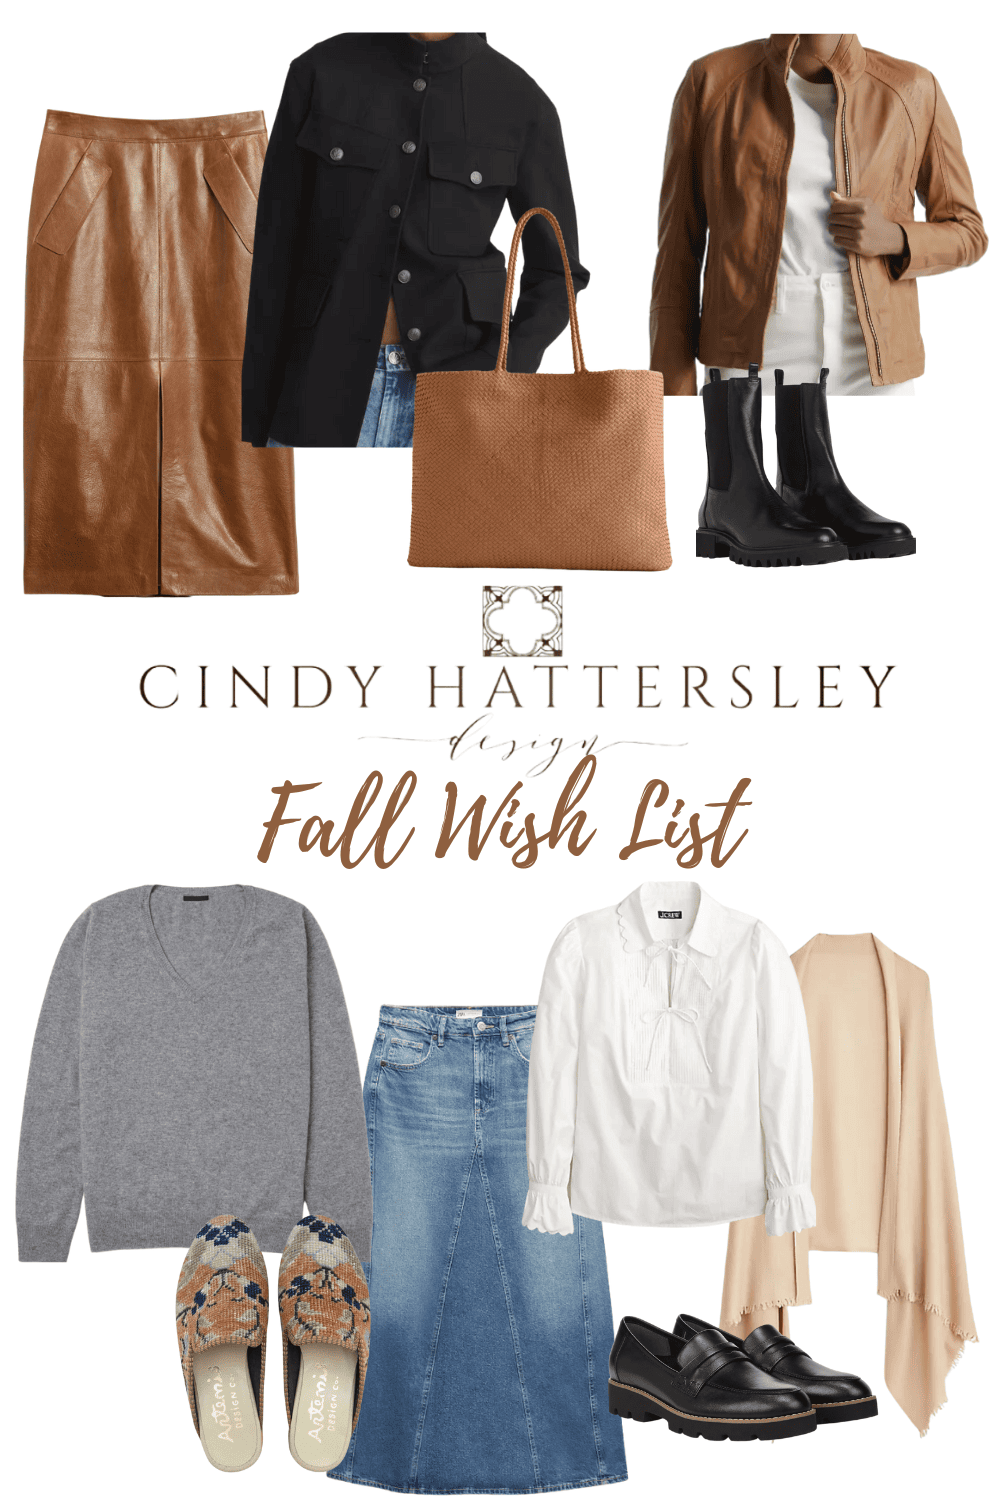 Over 80 Fall Outfits for Your Fall Outfit Inspiration